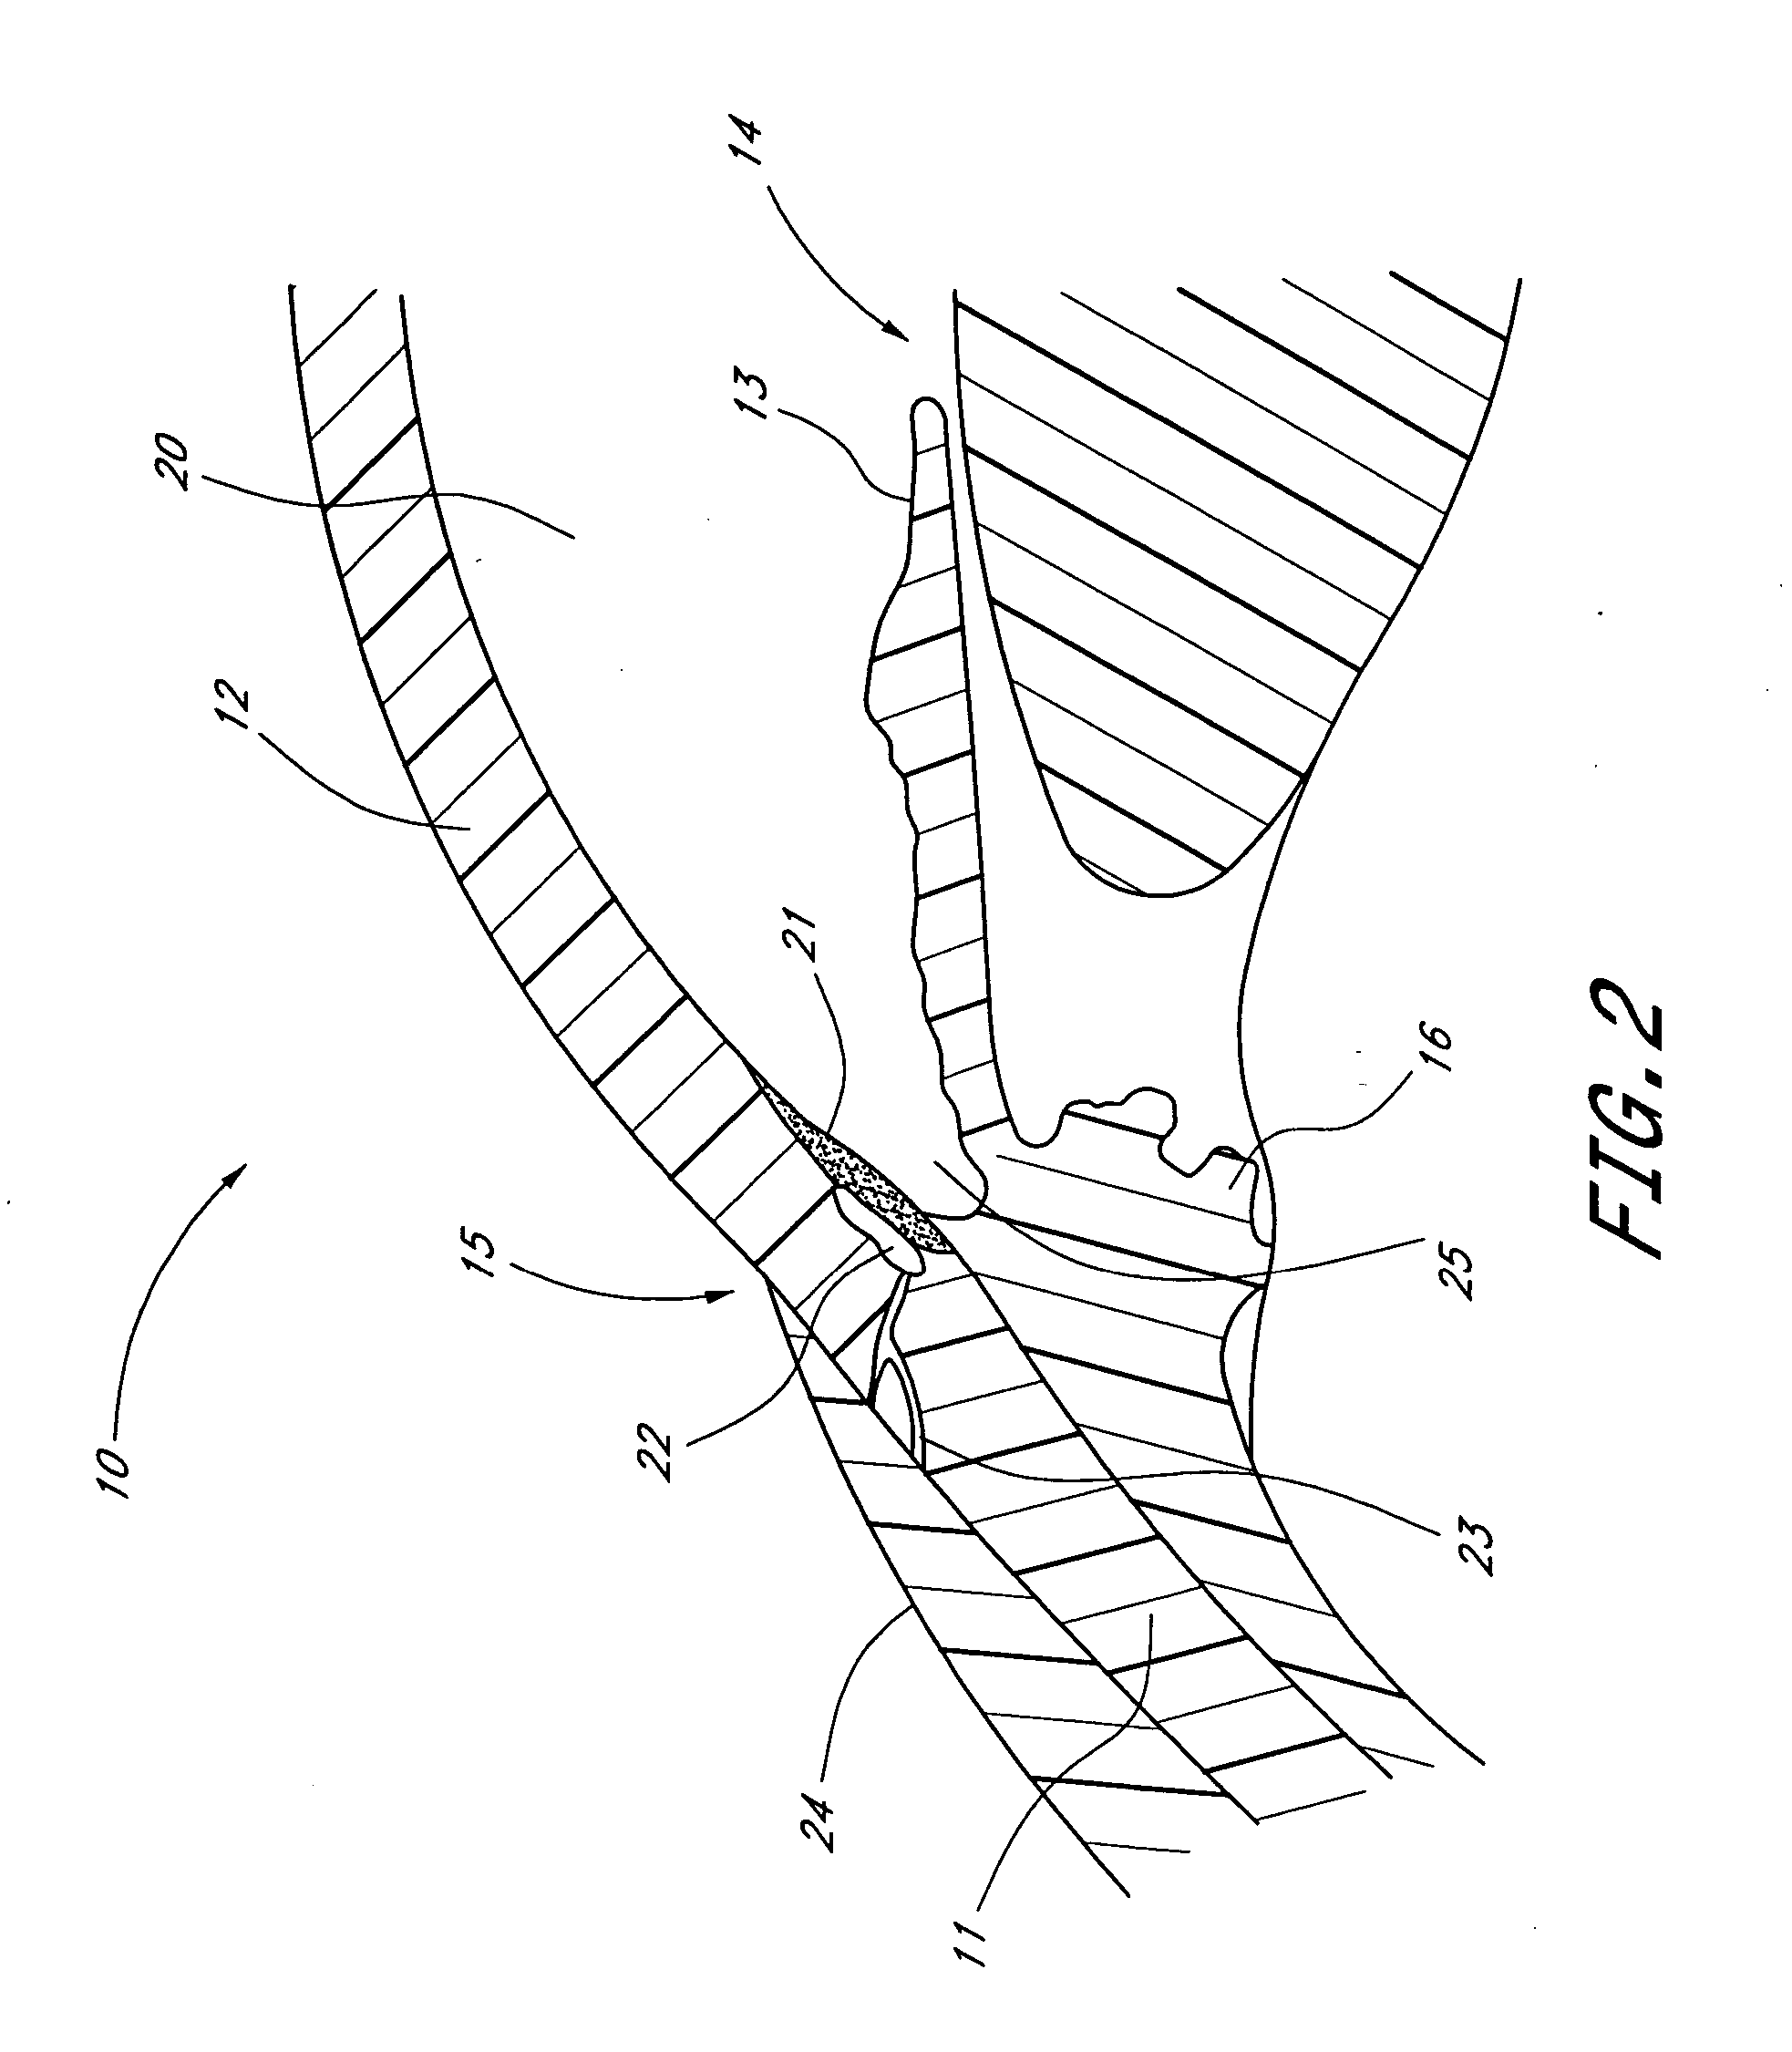 Medical device and methods of use for glaucoma treatment